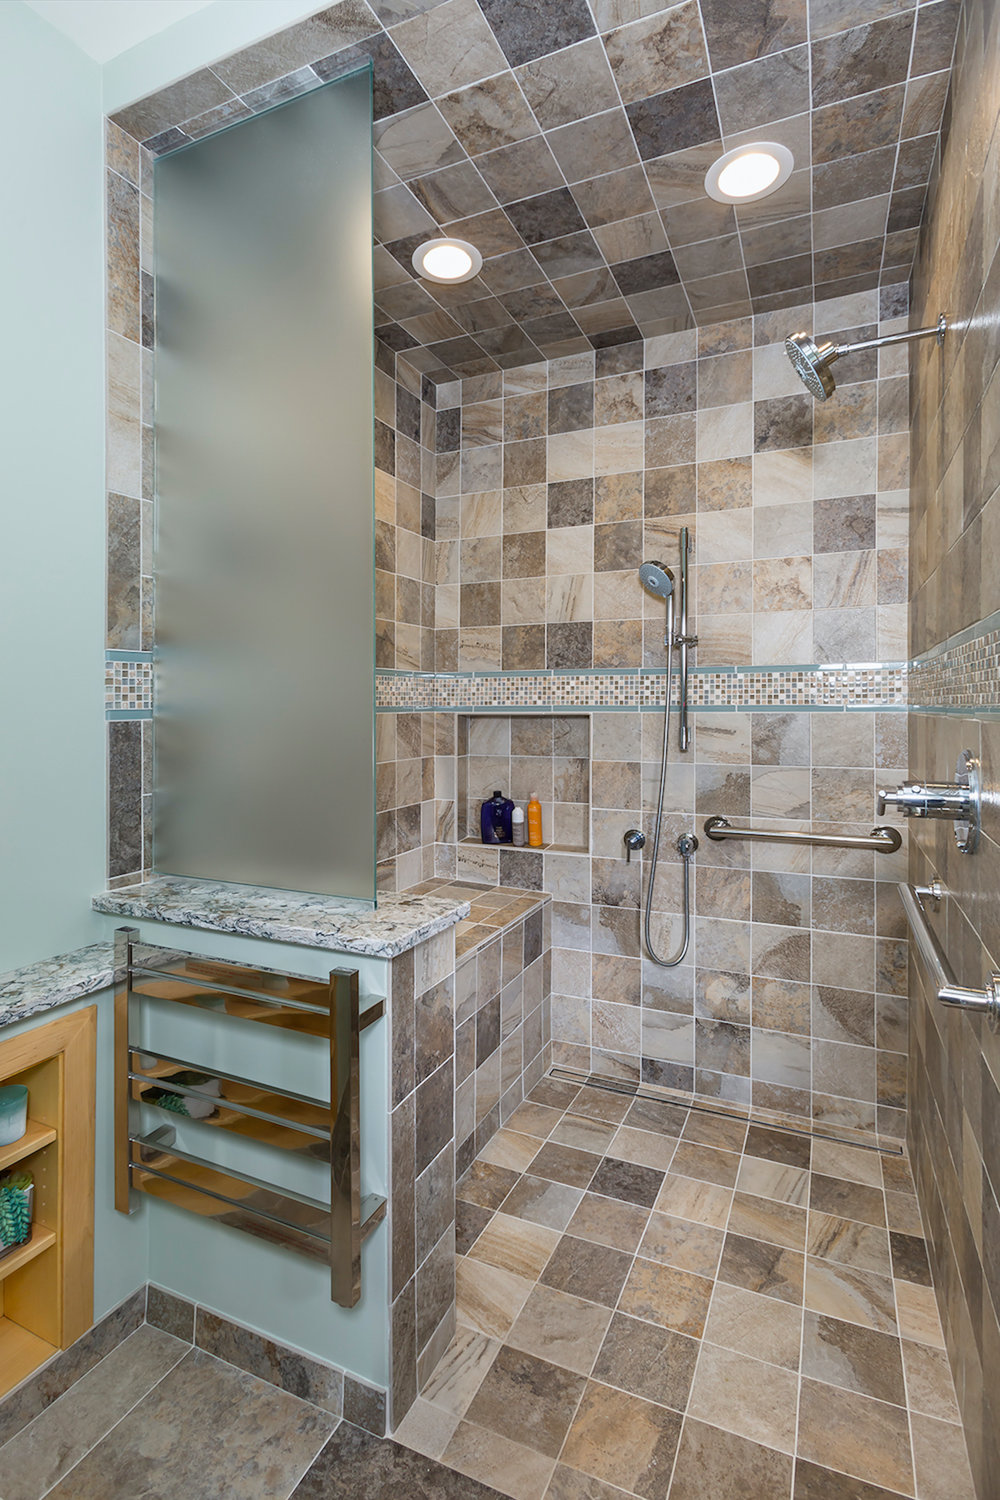 This bathroom by Sylvestre Remodeling & Design features a shower without a curb as it aids in mobility. Dangerous throw rugs have been removed. (Photos by Andrea Rugg Photography)